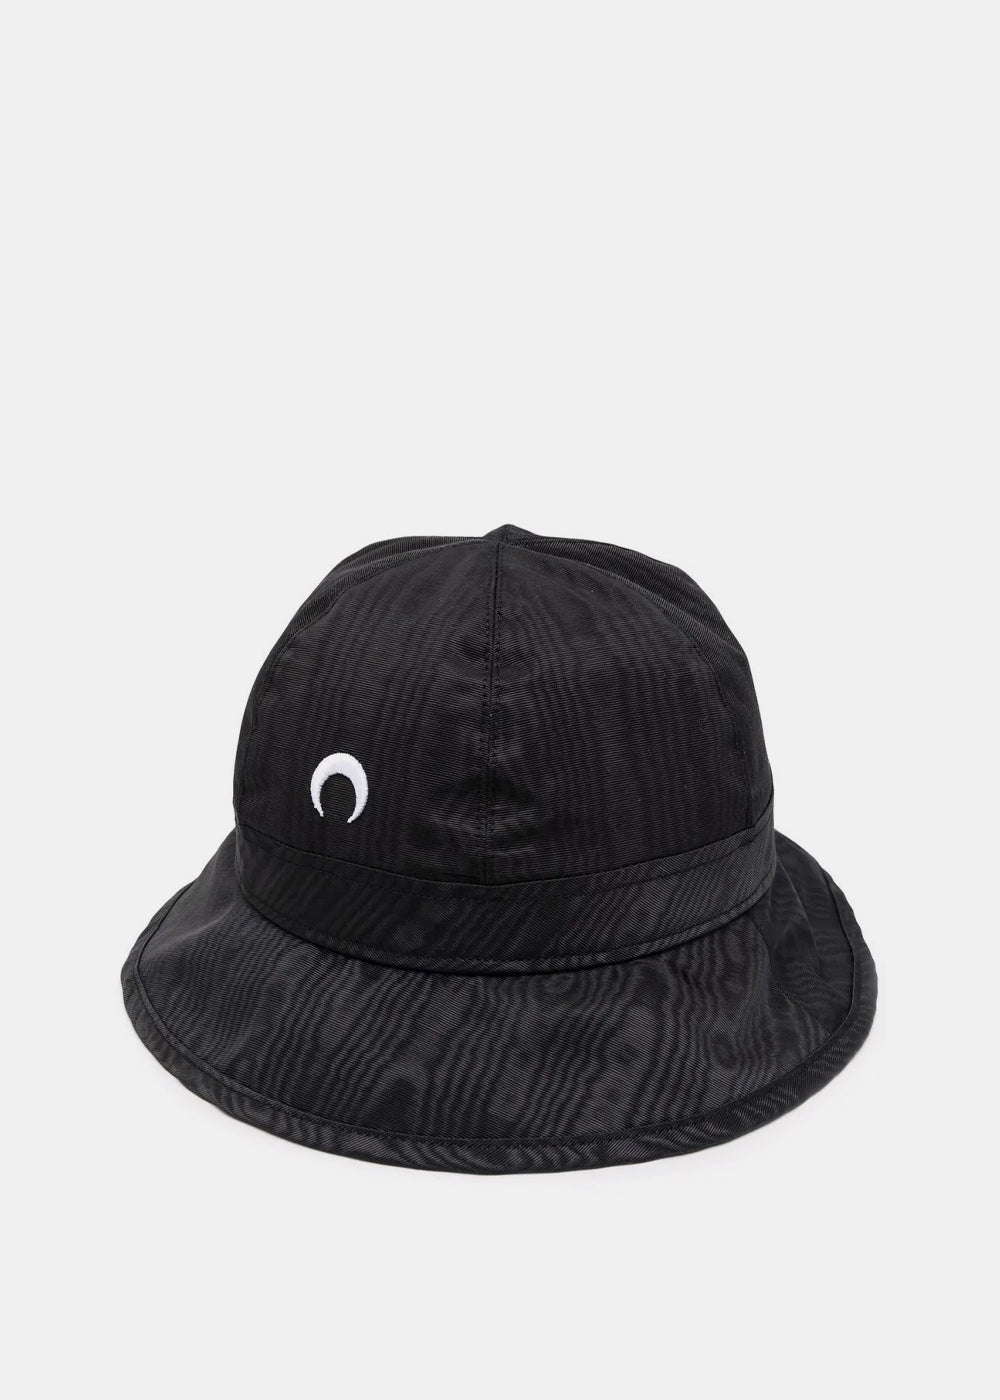 Marine Serre Black Embroidered Moire Bell Hat - NOBLEMARS